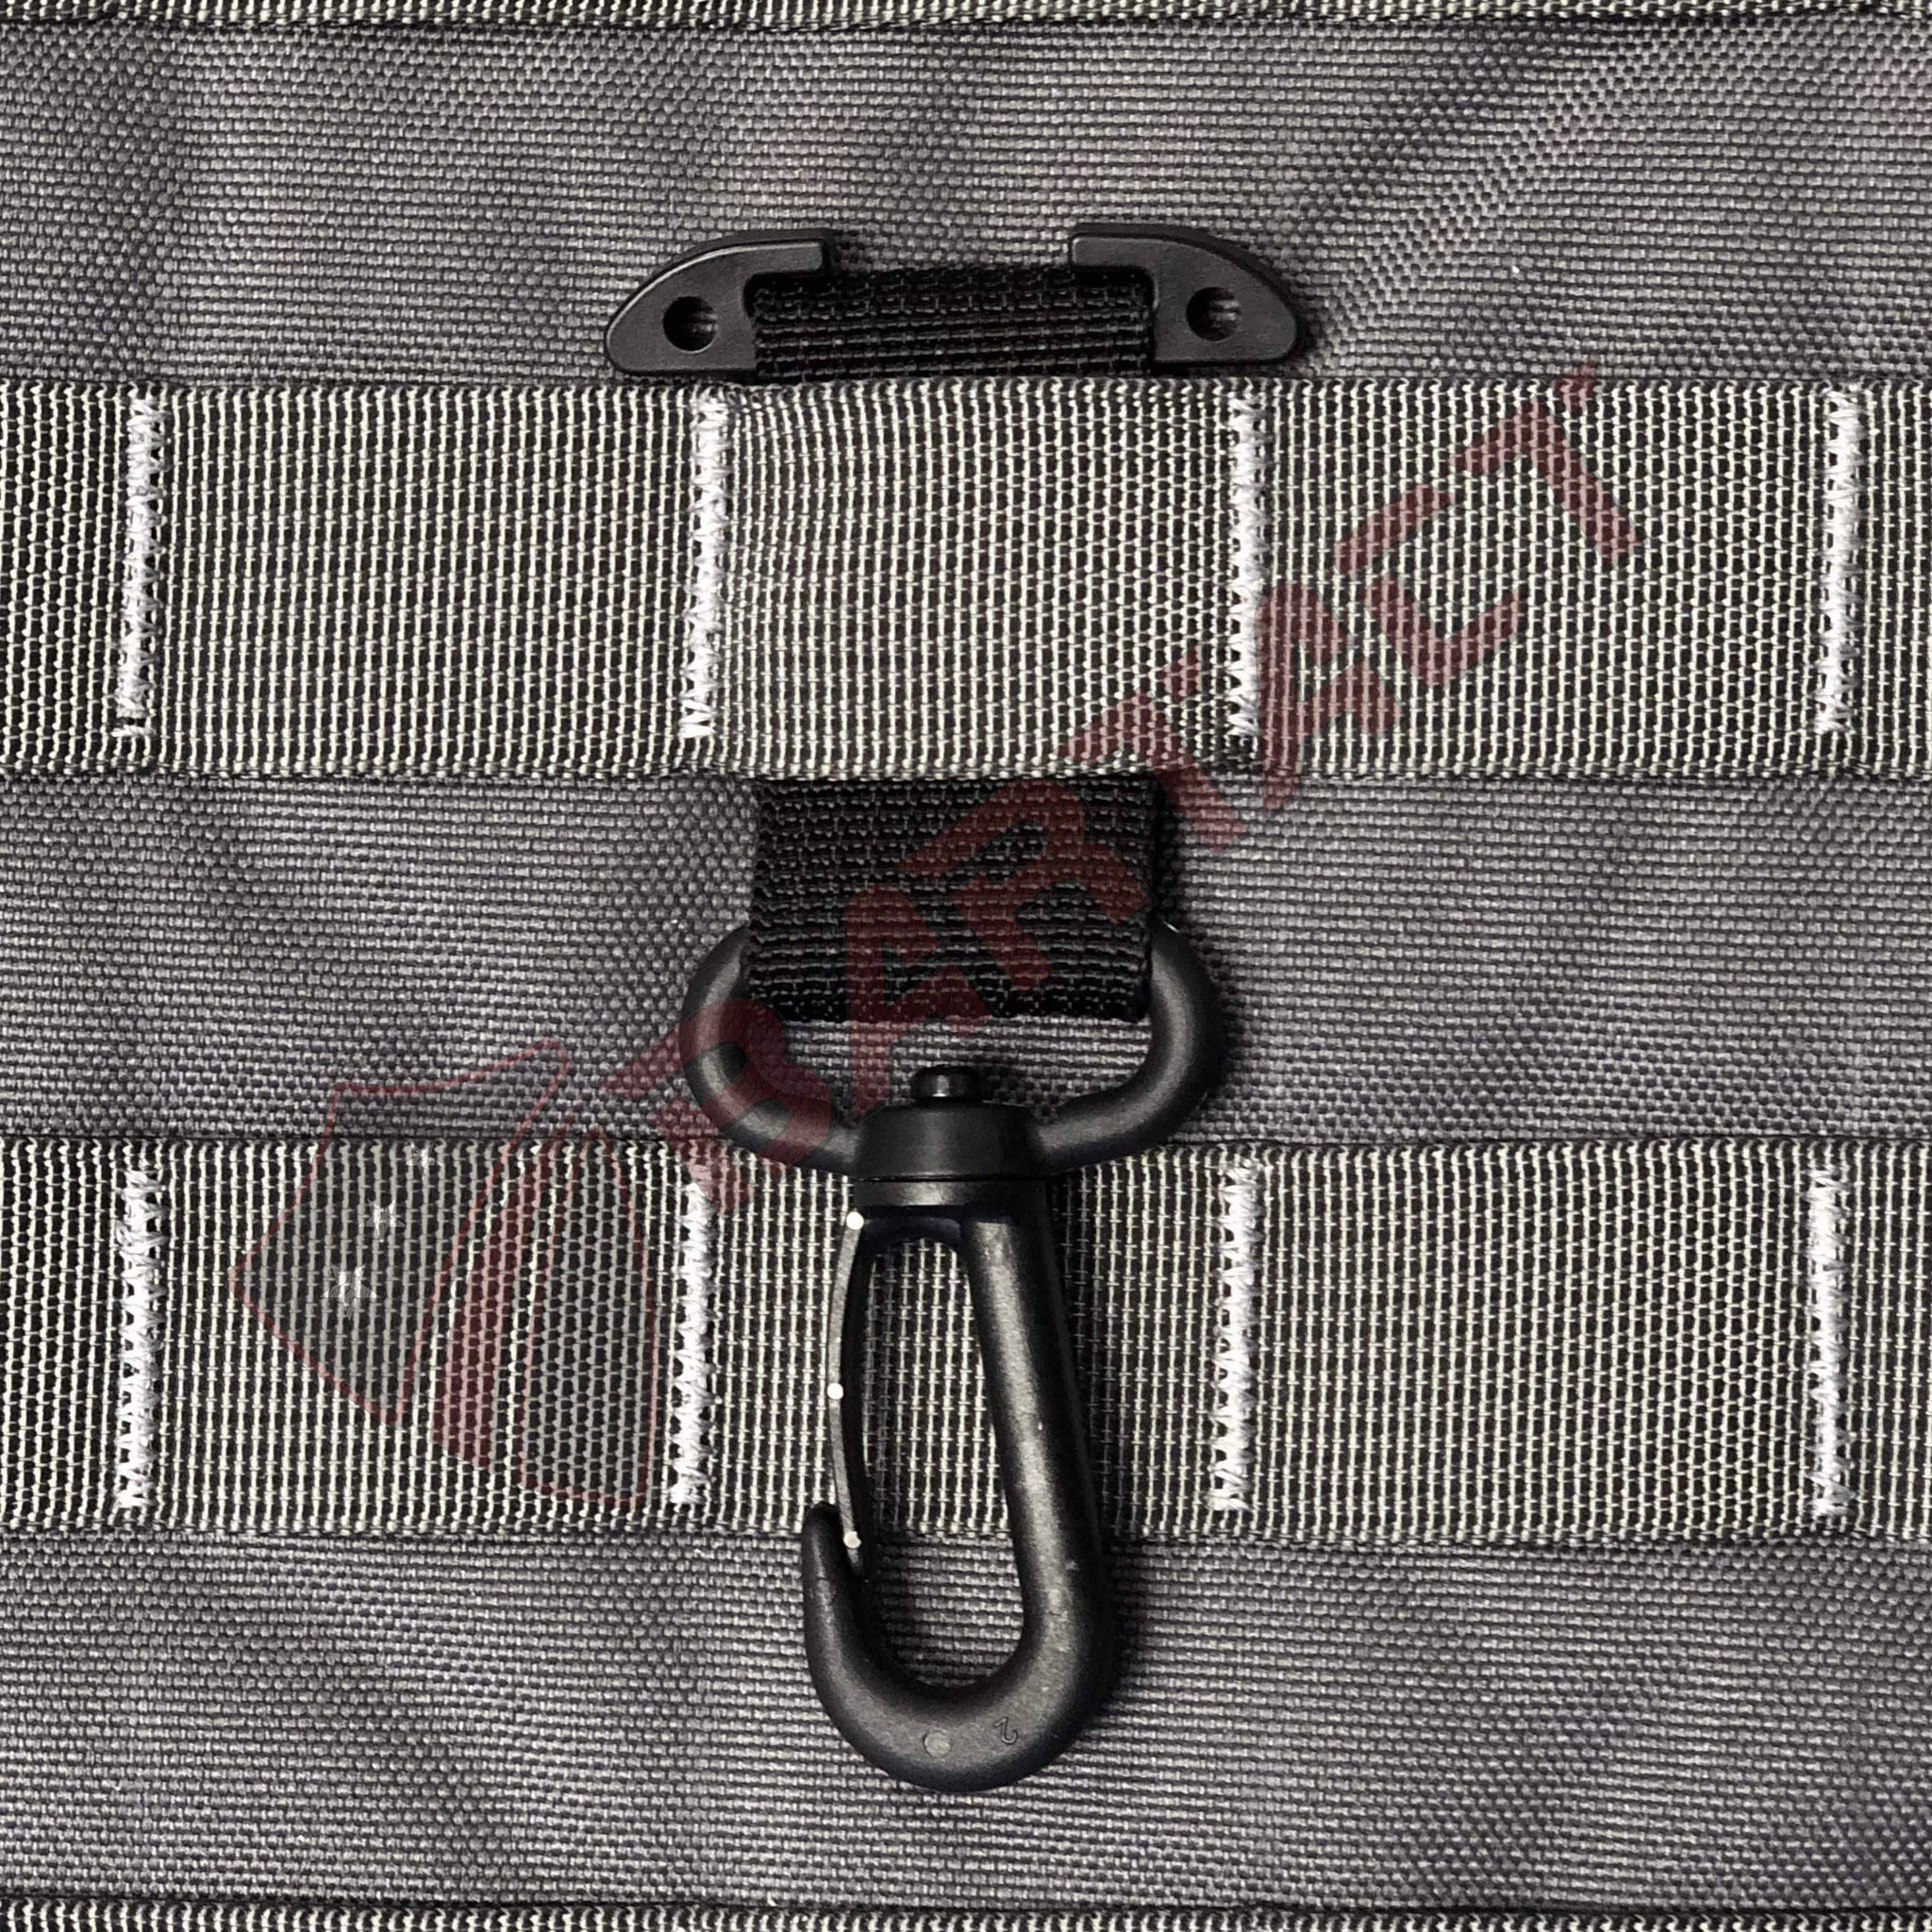 MOLLE Attachments by Bartact - PALS/MOLLE Acetal T-Bar w/ Heavy Duty D-Rings  (pair of 2)